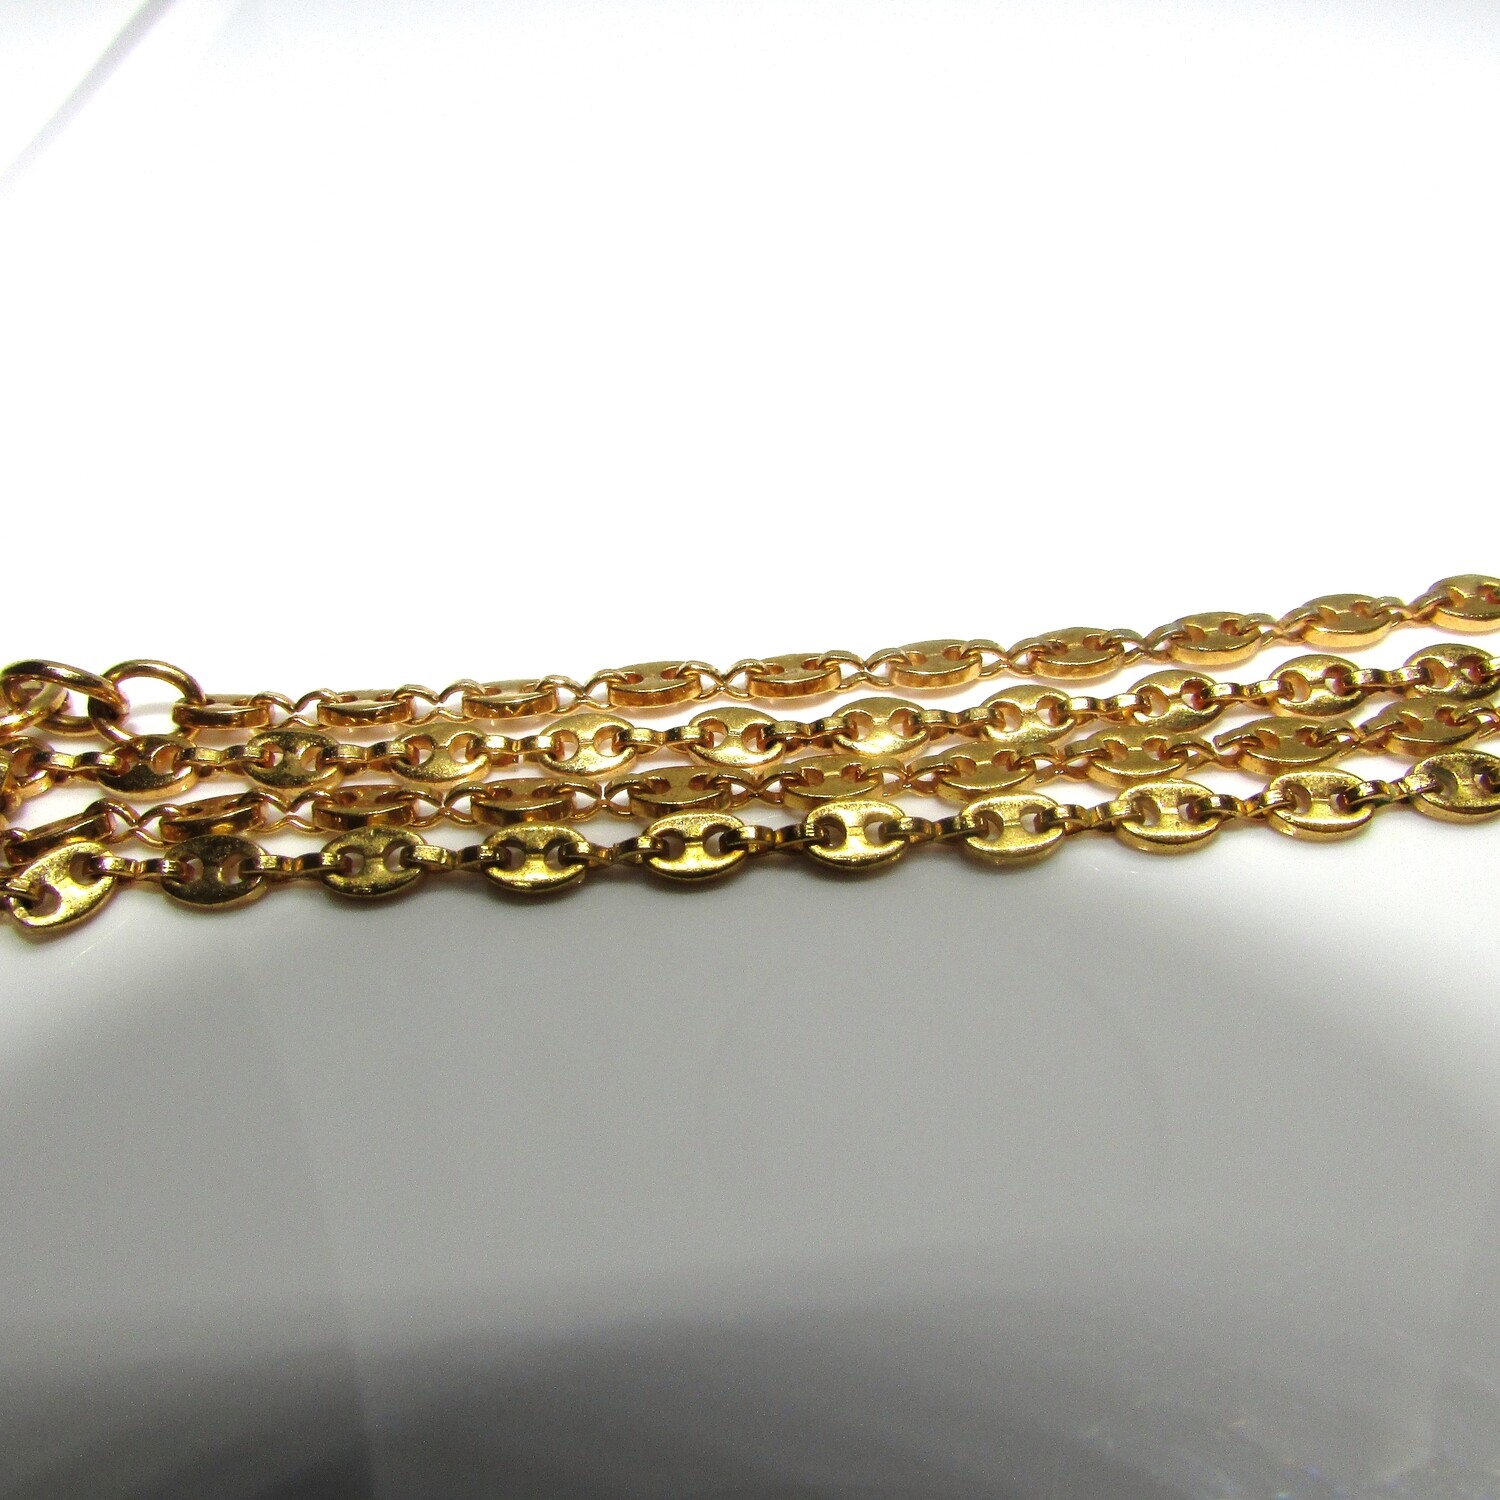 Monet's Gold Link Gucci Chain c. 1970's